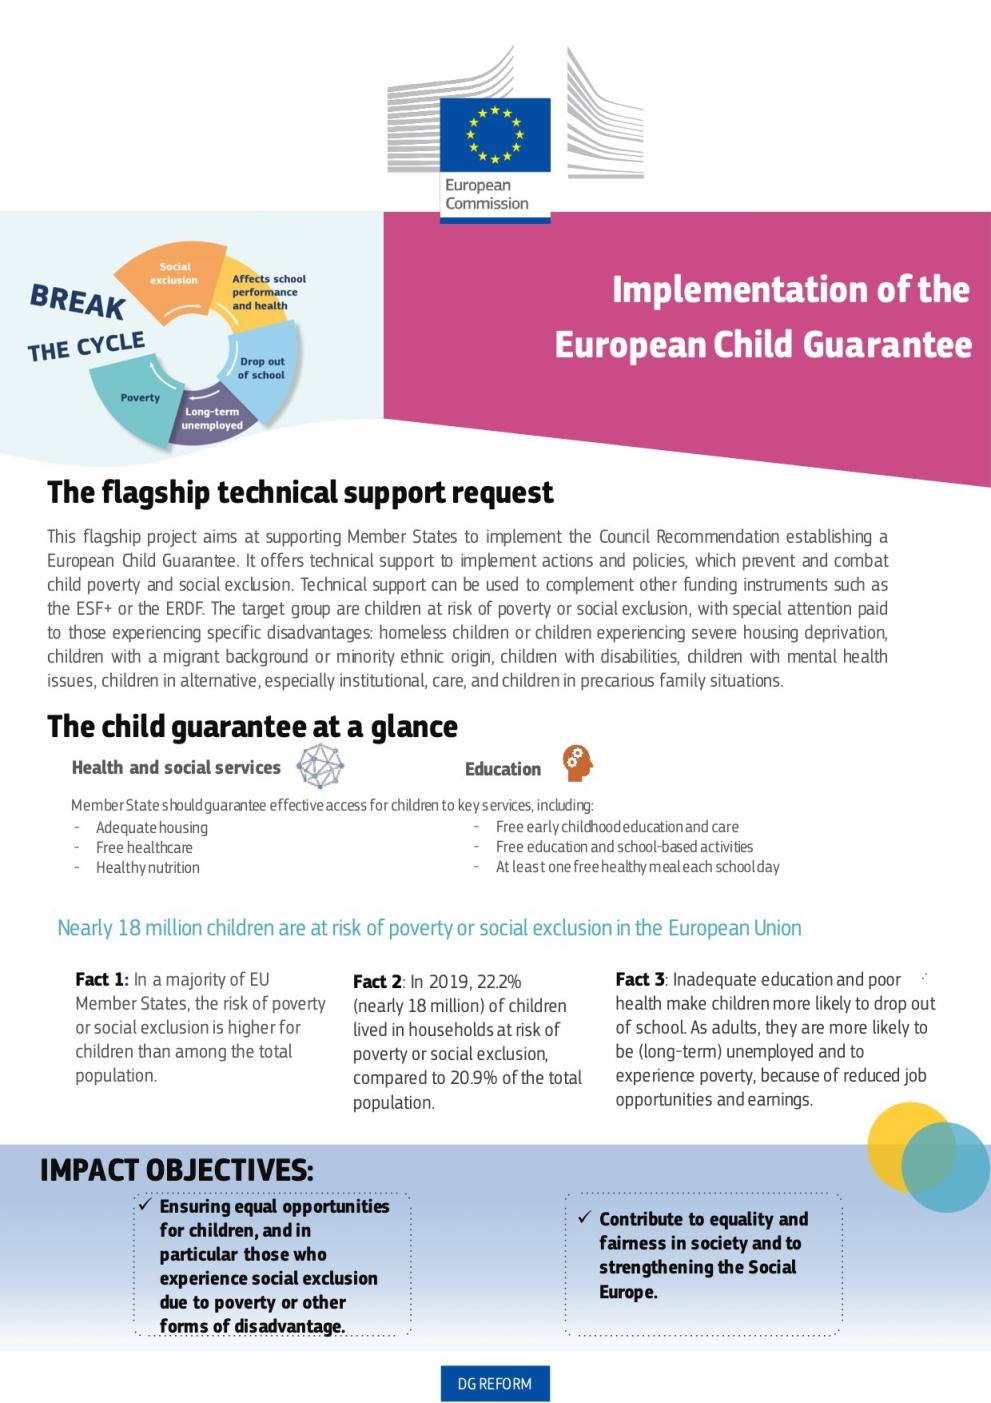 Implementation of the European Child Guarantee in EU Member States